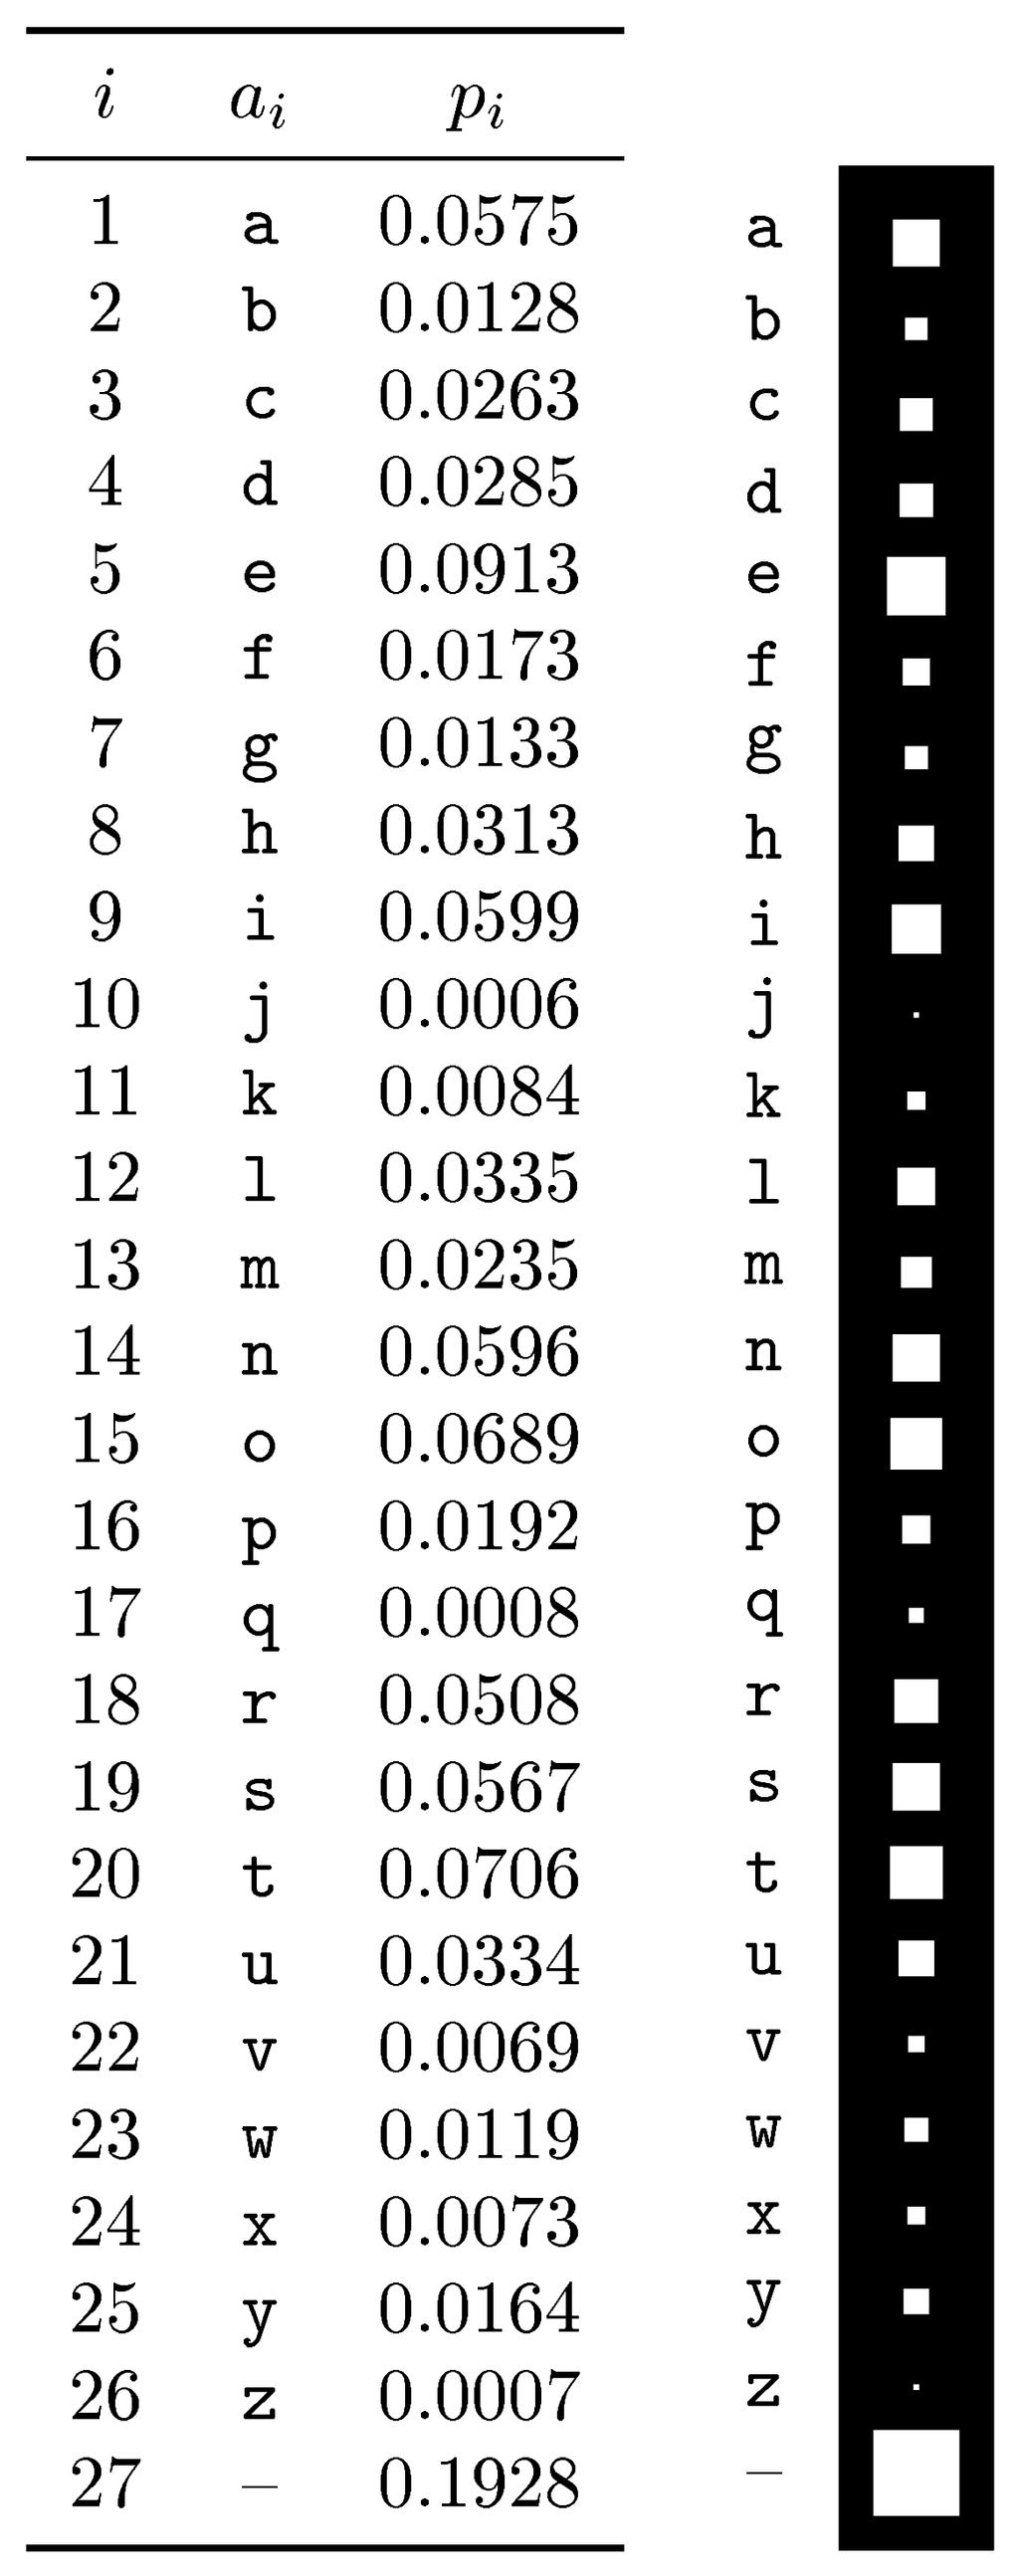 Definitions and notation Example 1 Frequency of letters in The Frequently Asked Questions Manual for Linux.